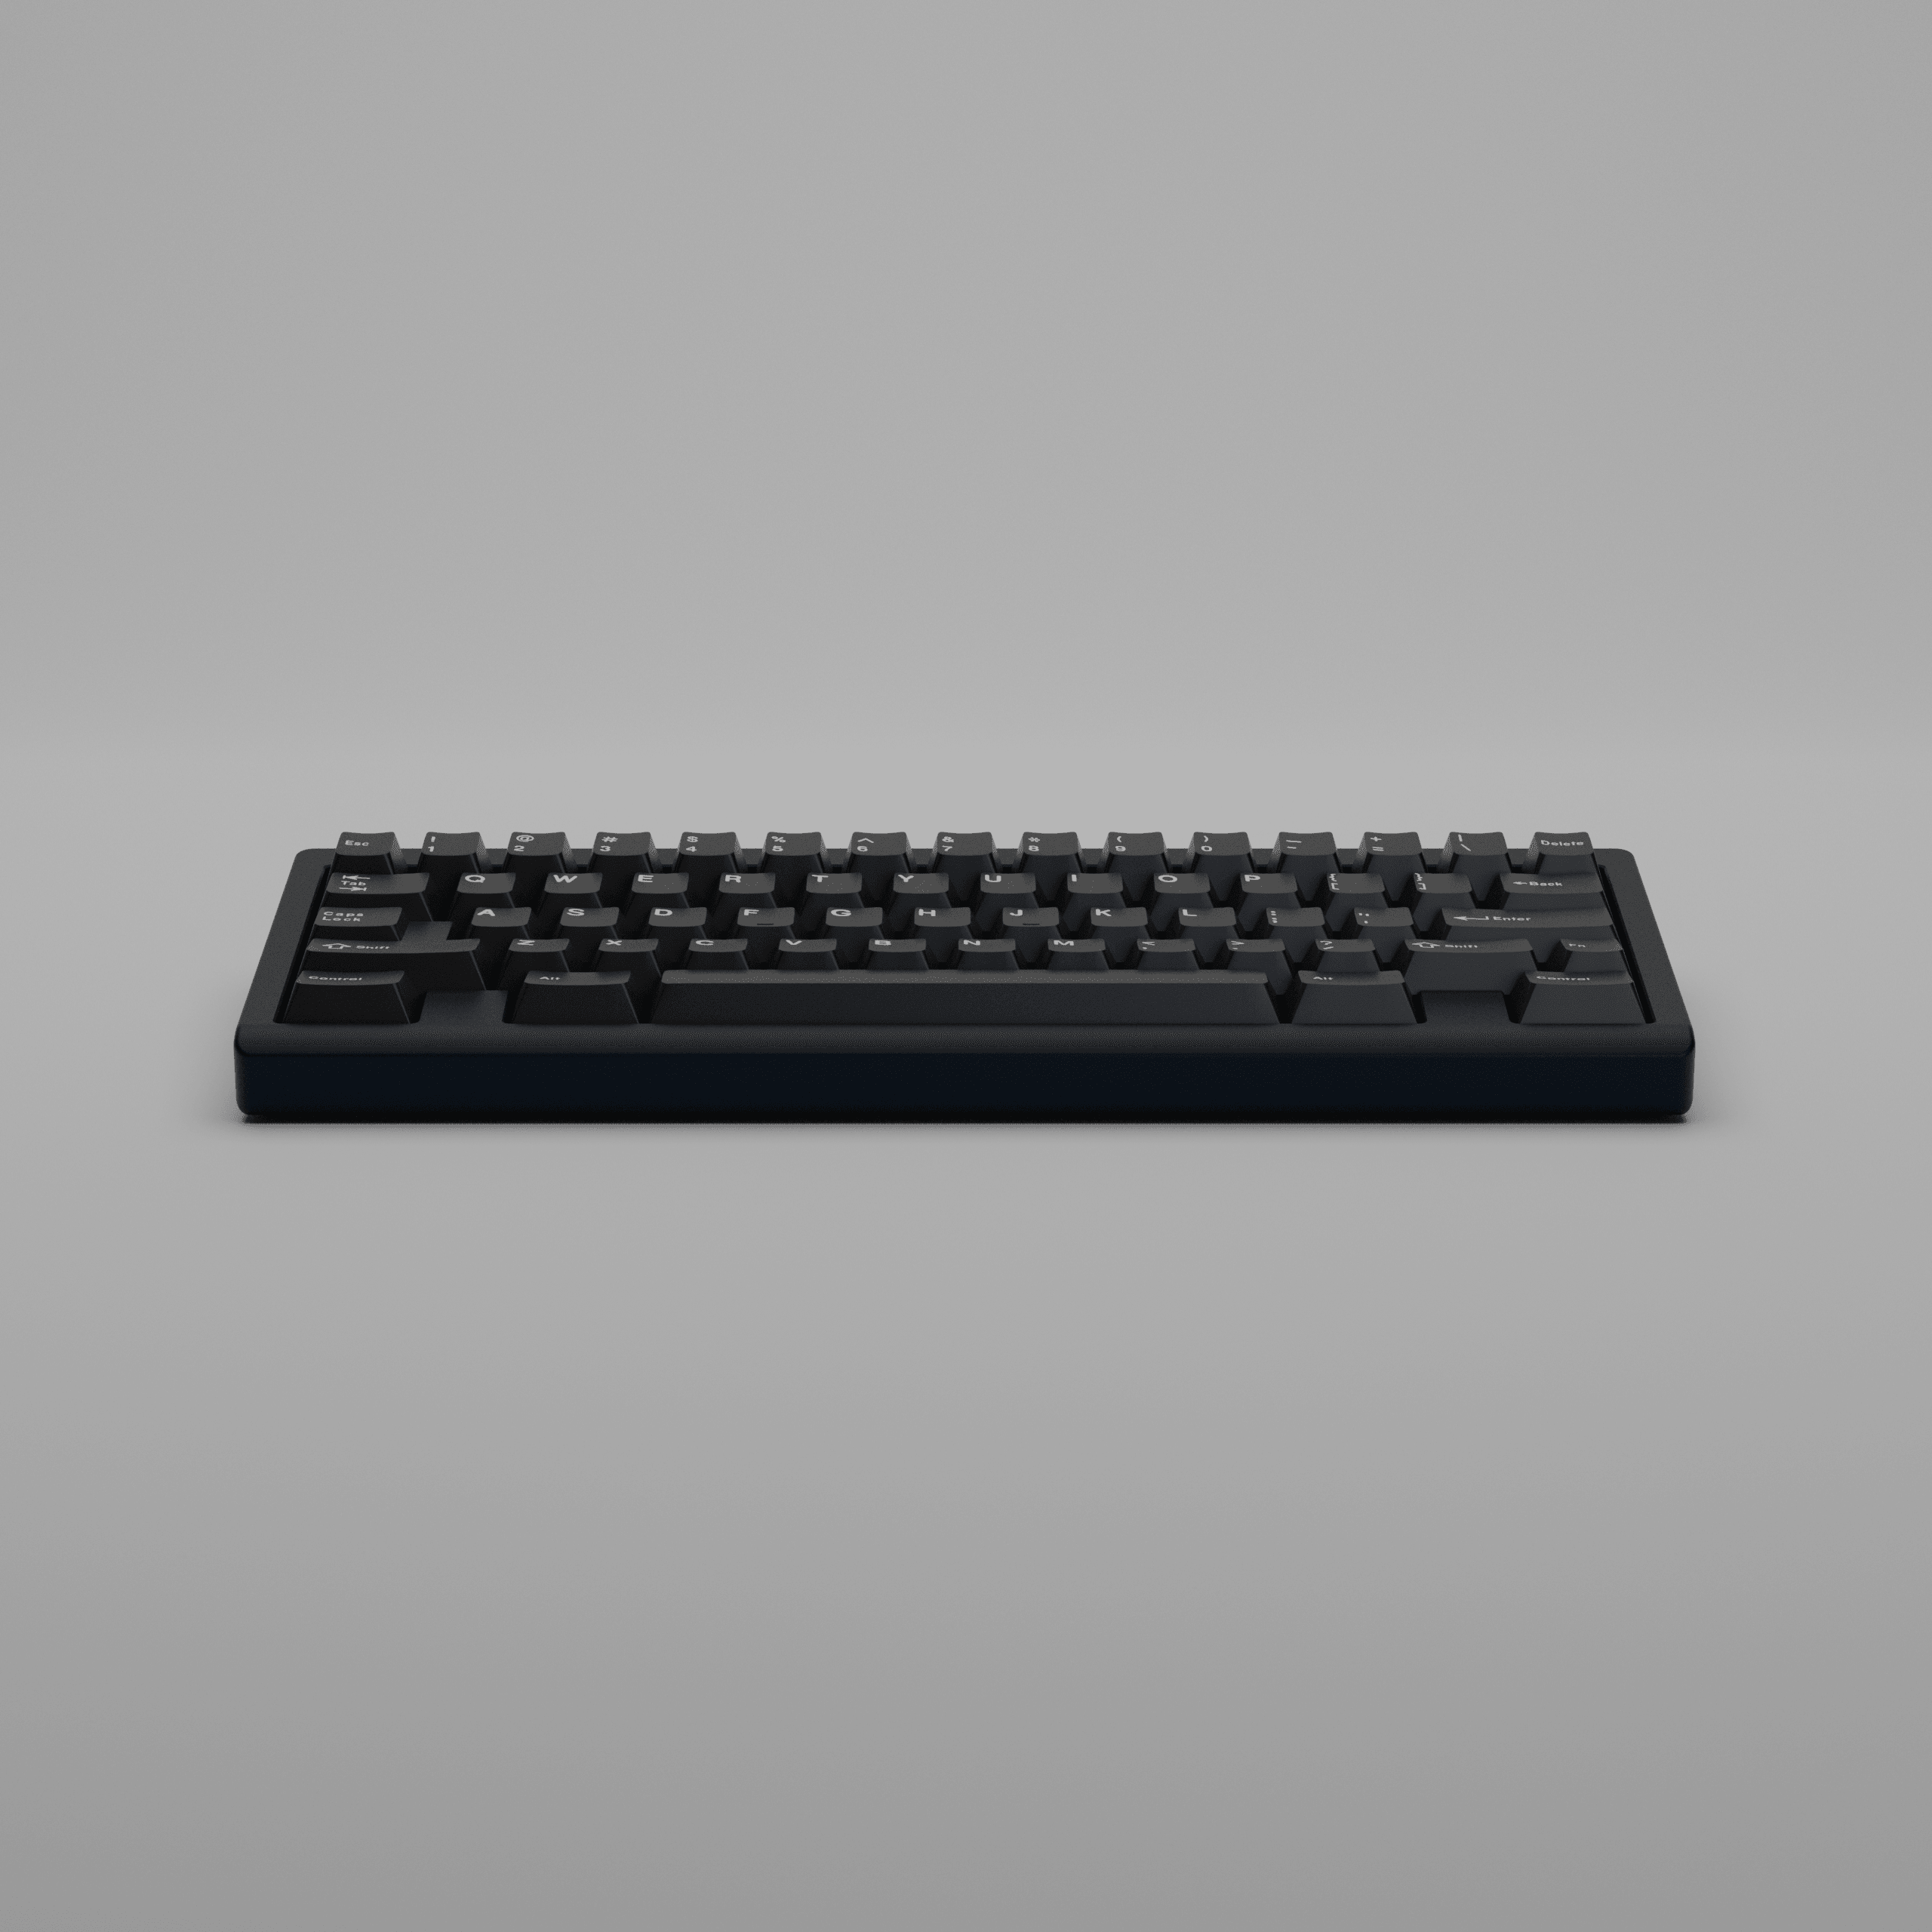 [GB] Snake Keyboard [Midnight] - Parallel Limited